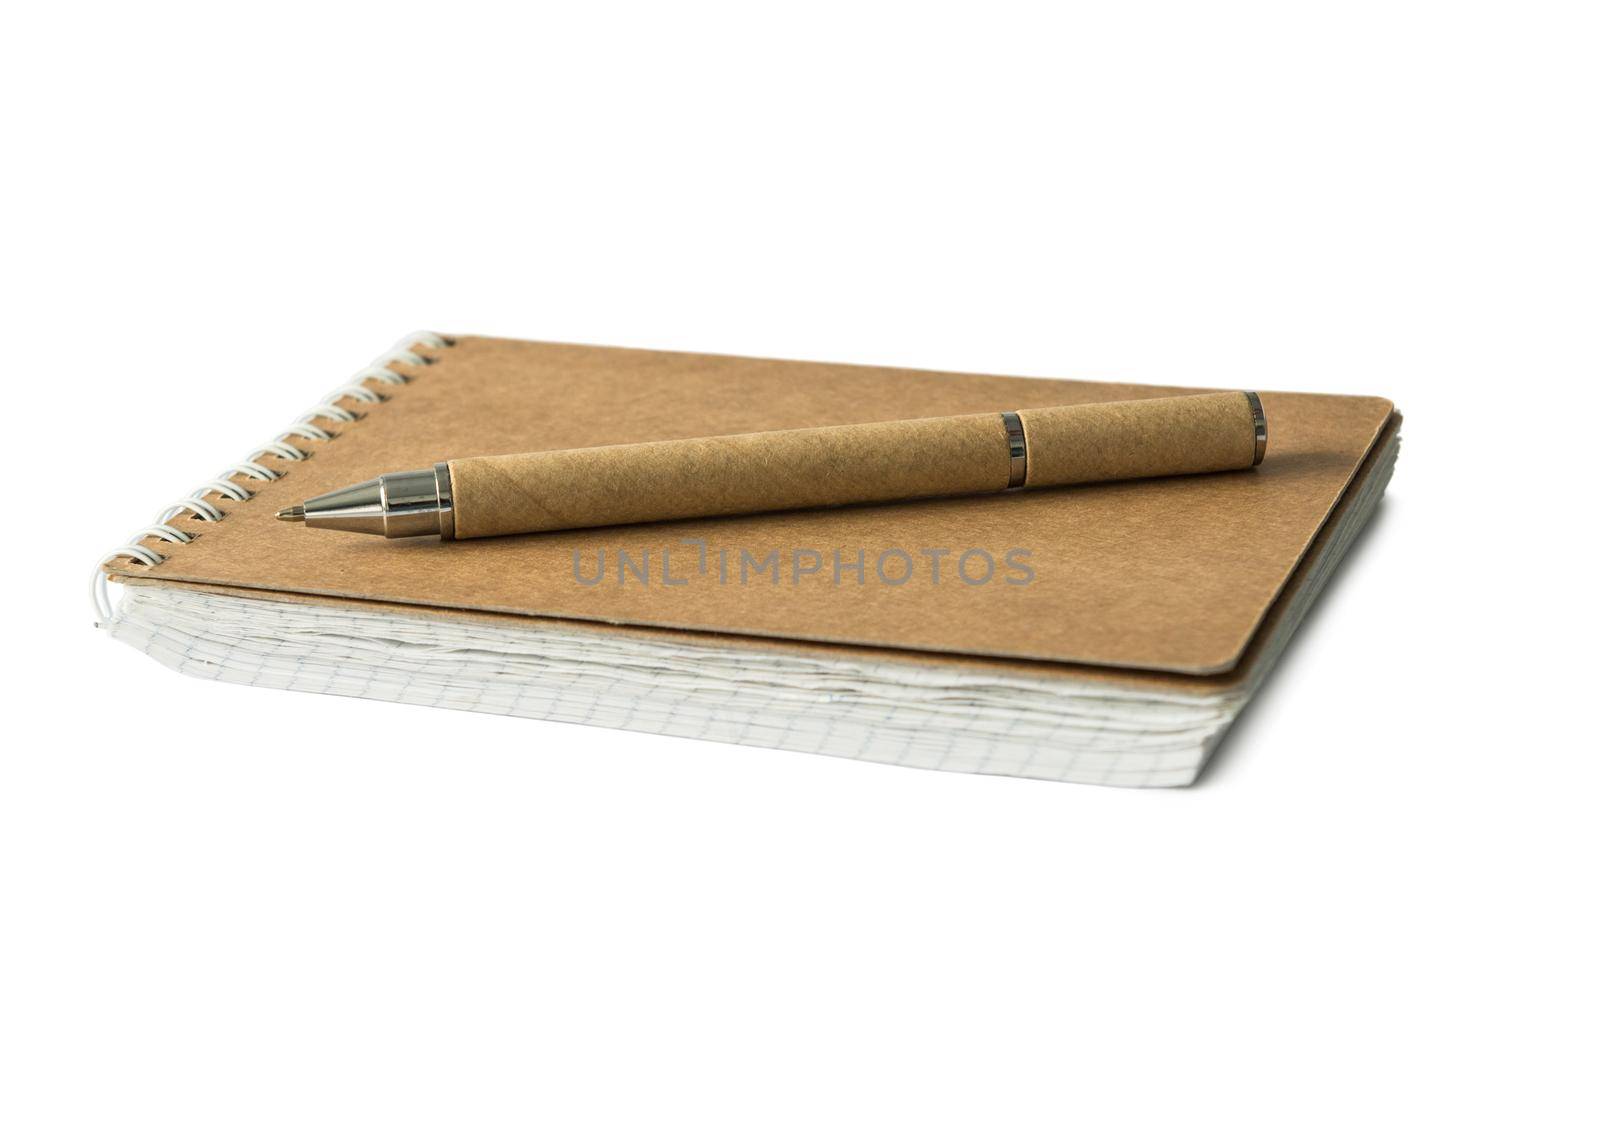 eco notebook and pen with carton covers isolated on white background